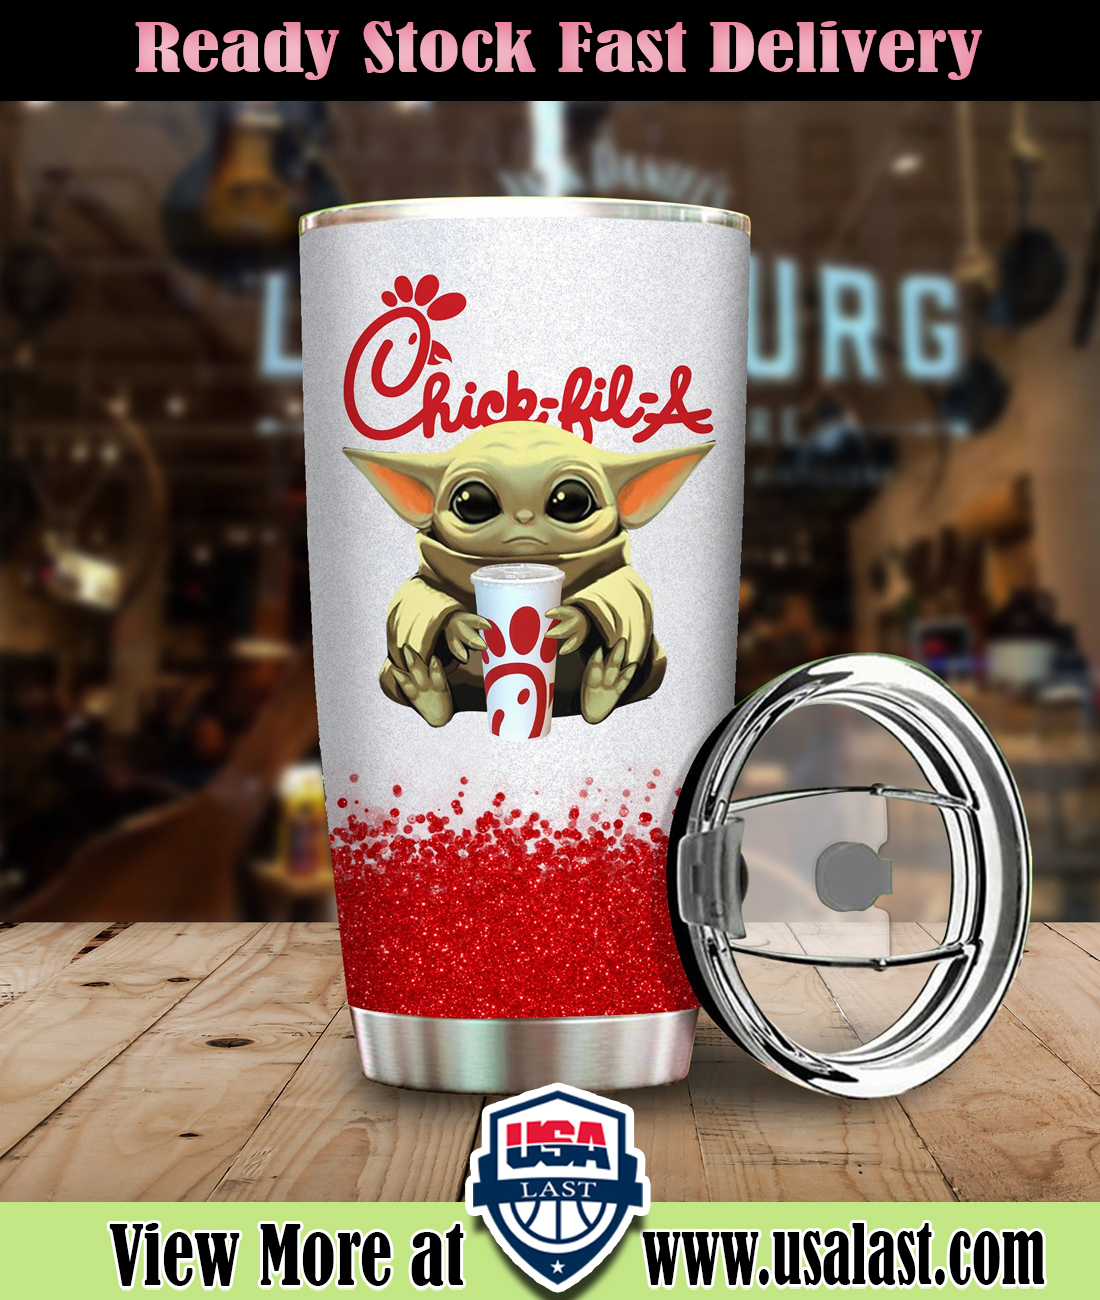 Baby Yoda Holding Chick-Fil-A Steel Tumbler